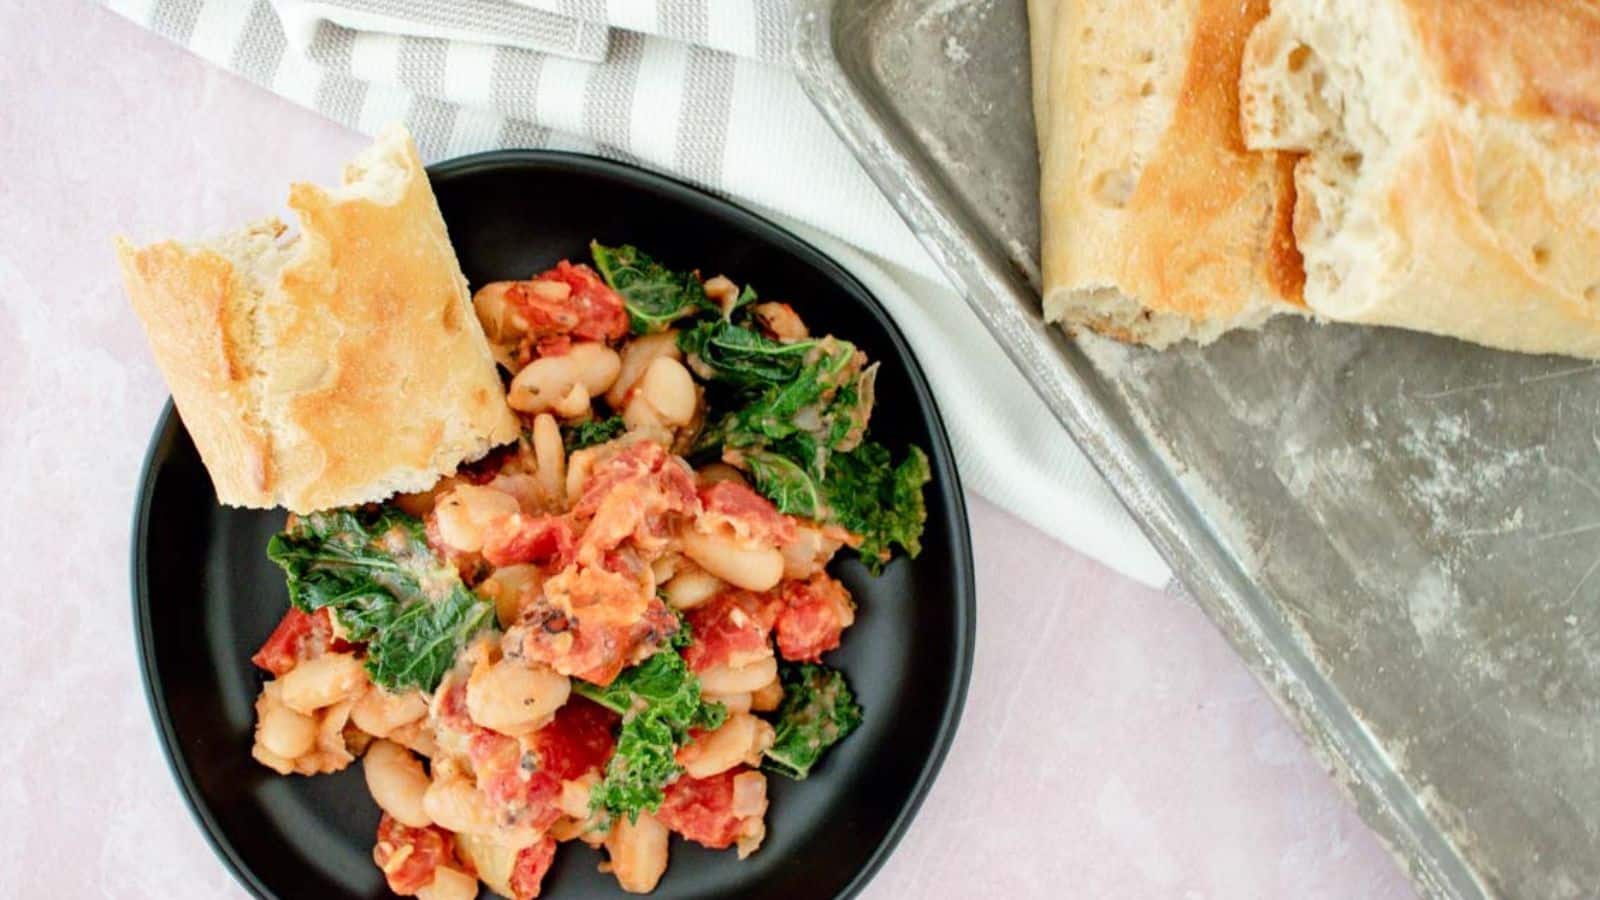 <p>Experience a trip to Italy right on your plate! The highlight of our Tuscan White Bean Skillet is a unique addition – liquid smoke, bringing a dash of Italian authenticity and a world of flavor you won’t forget.<br><strong>Get the Recipe: </strong><a href="https://twocityvegans.com/tuscan-white-bean-skillet-with-kale/?utm_source=msn&utm_medium=page&utm_campaign=msn" rel="noopener">Tuscan White Bean Skillet with Kale</a></p>